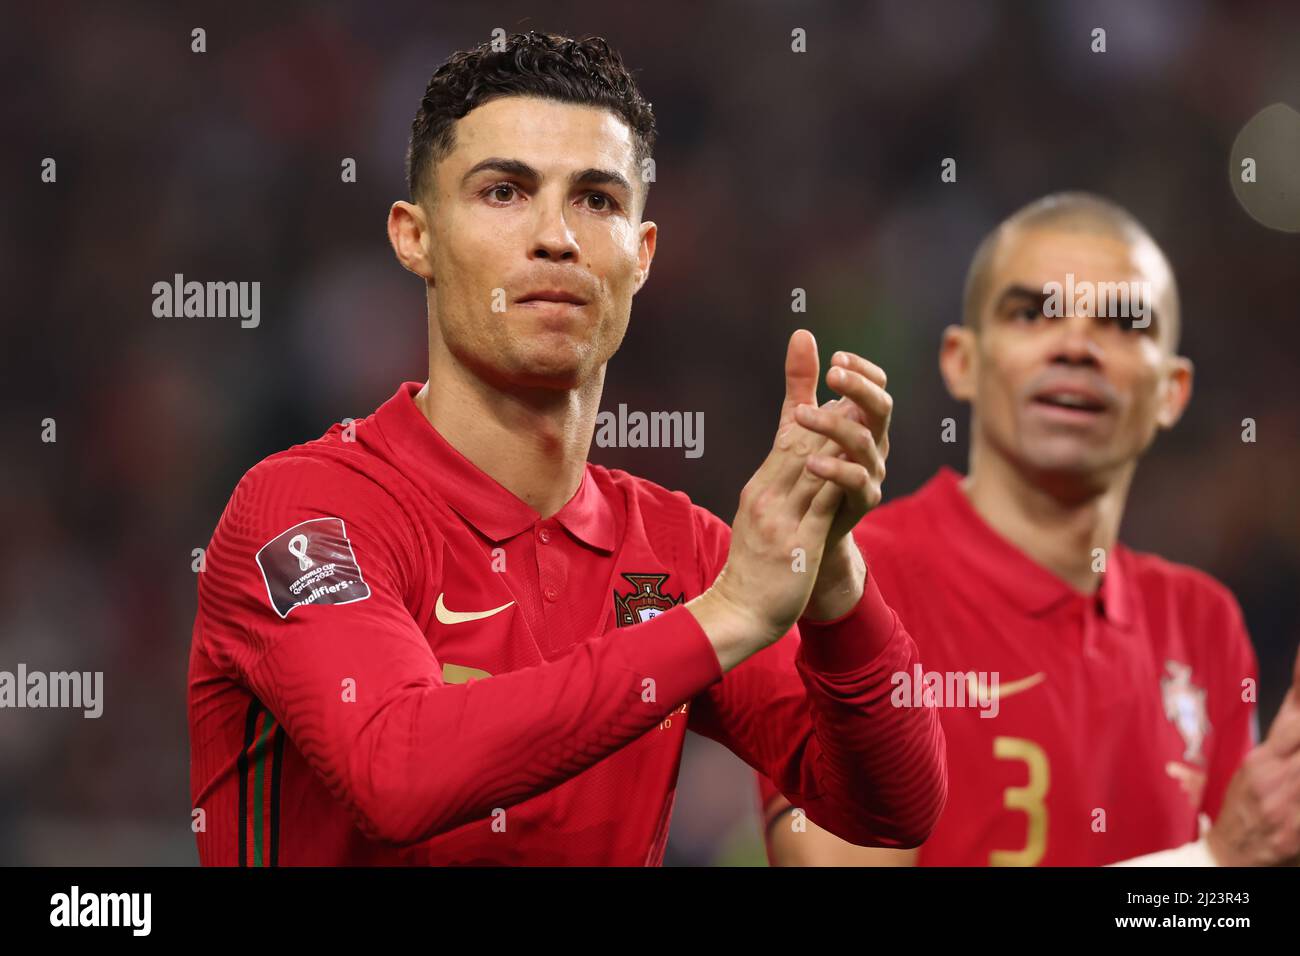 Porto, Portugal, 29th March 2022. Cristiano Ronaldo and Pepe of Portugal acknowledge the fas following the final whistle of the FIFA World Cup 2022 - European Qualifying match at the Estadio do Dragao, Porto. Picture credit should read: Jonathan Moscrop / Sportimage Credit: Sportimage/Alamy Live News Stock Photo